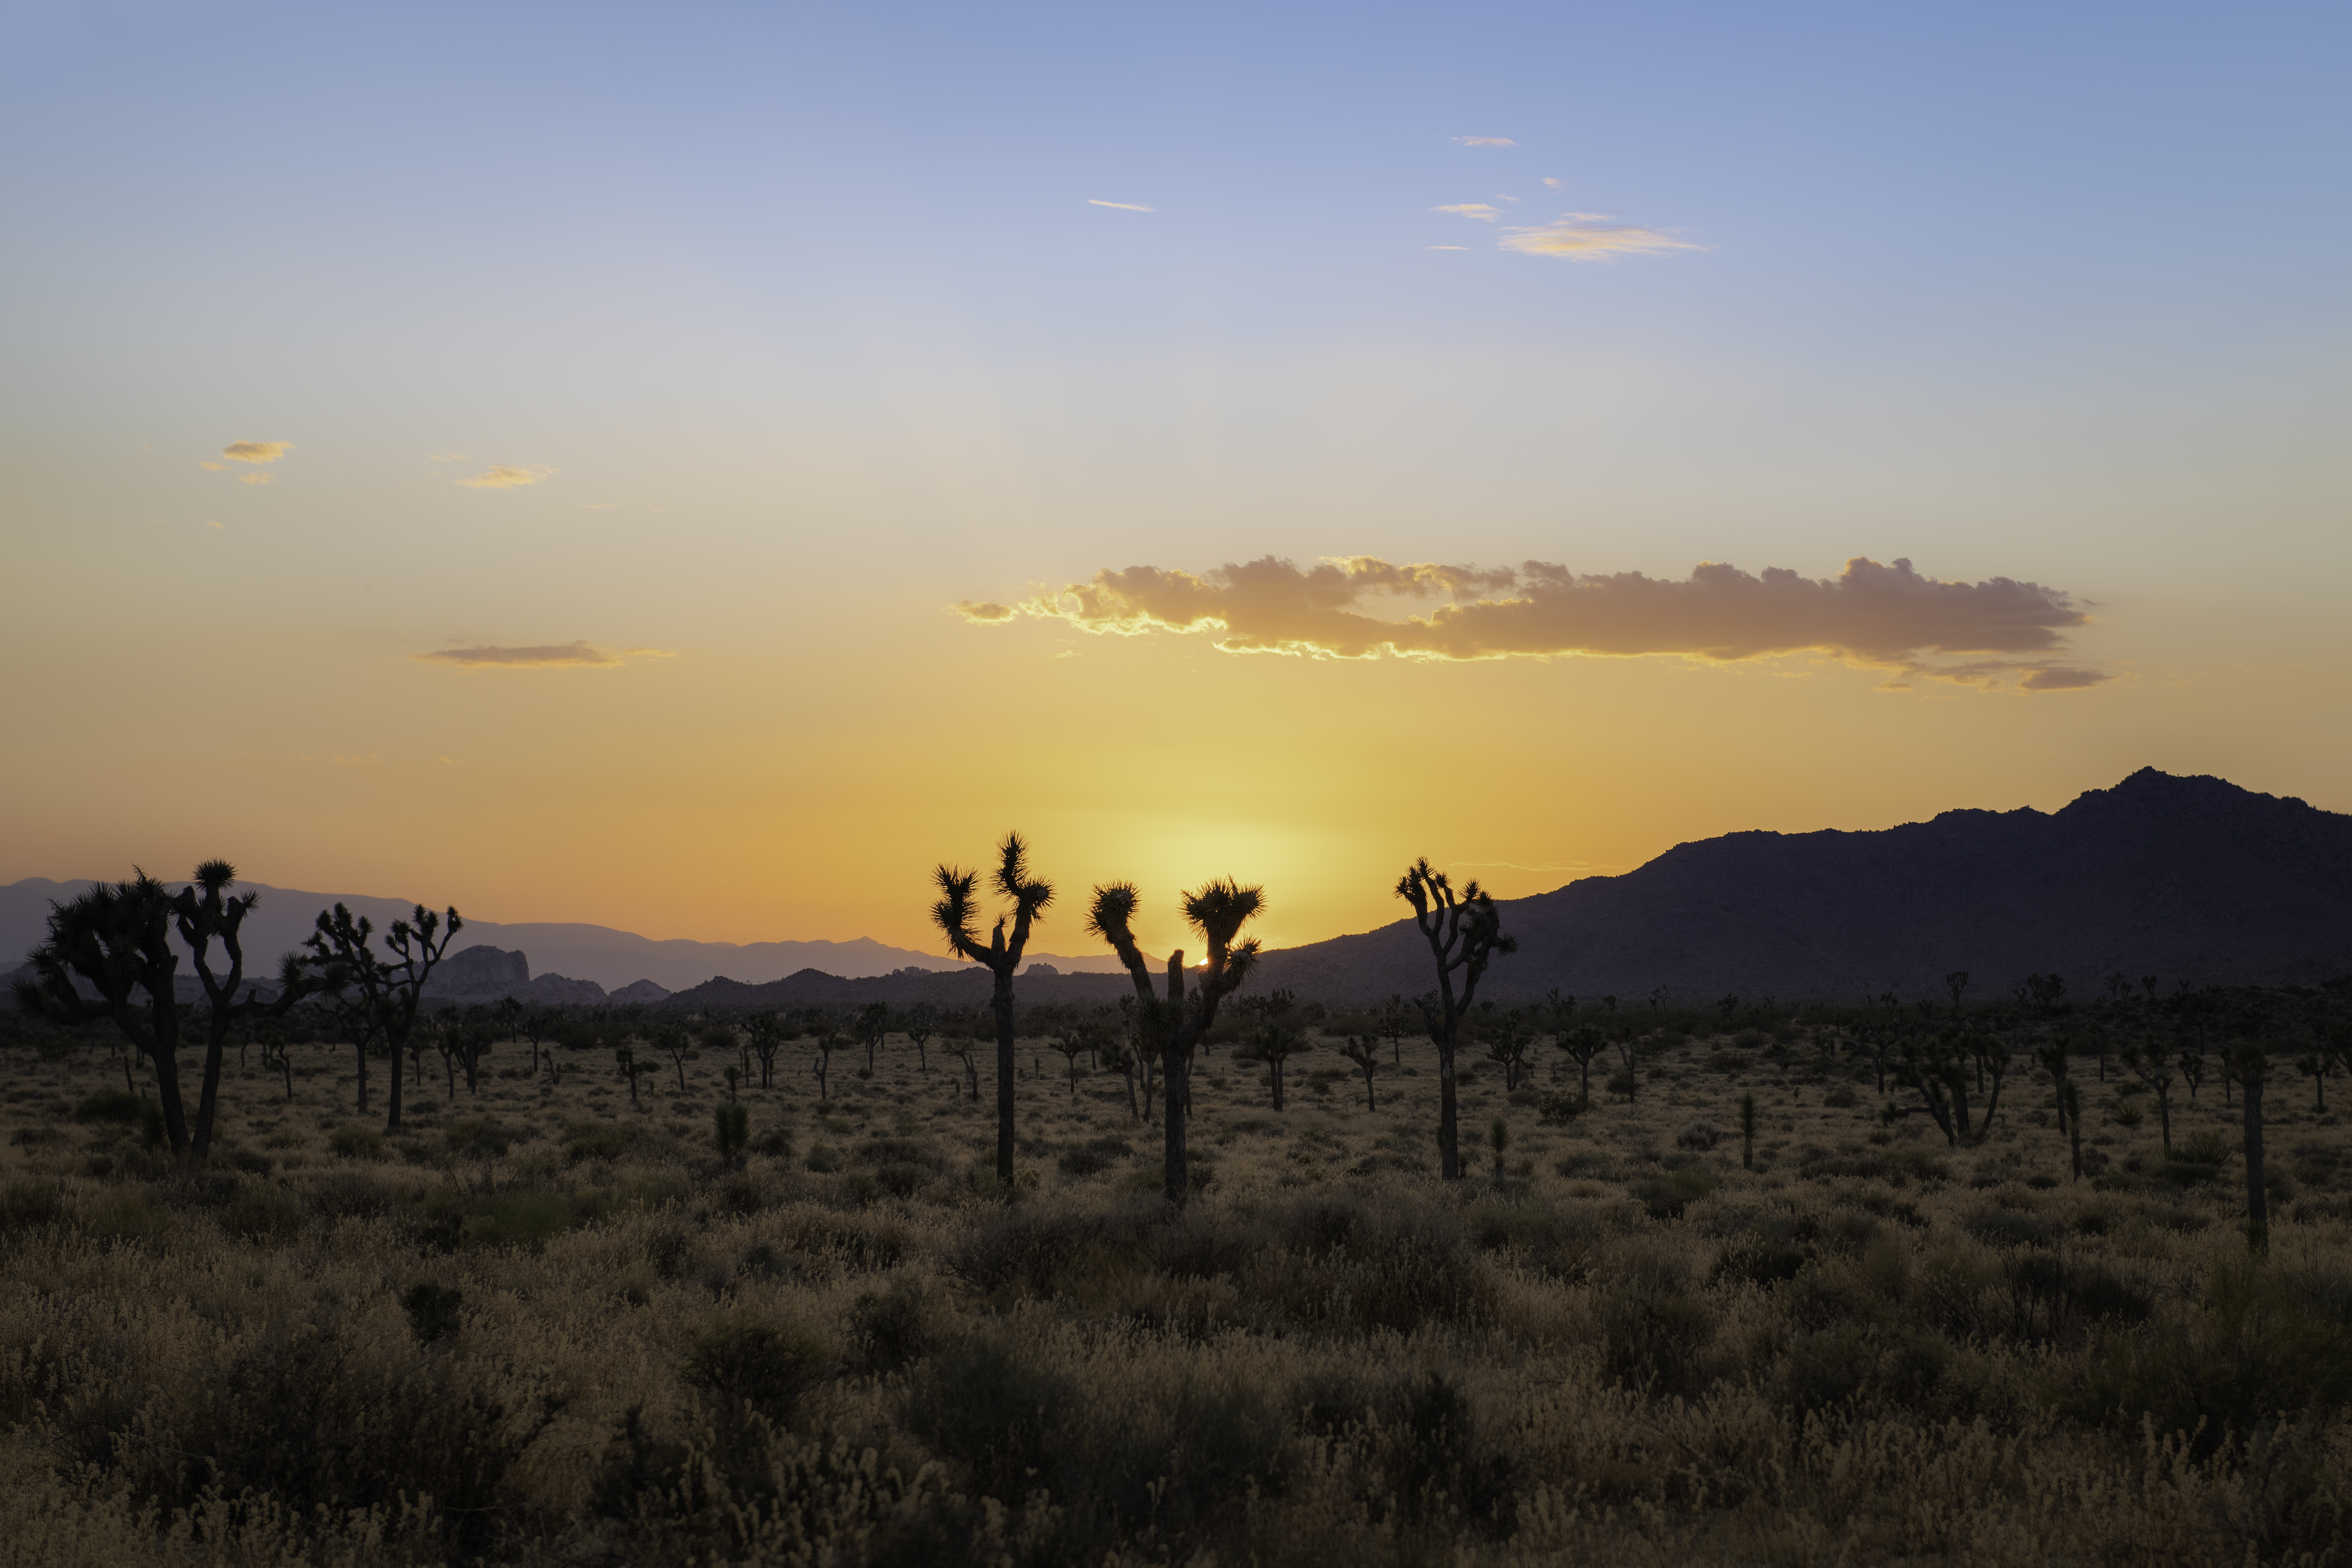 Download PC Wallpaper mountains, nature, cactuses, sunset, desert